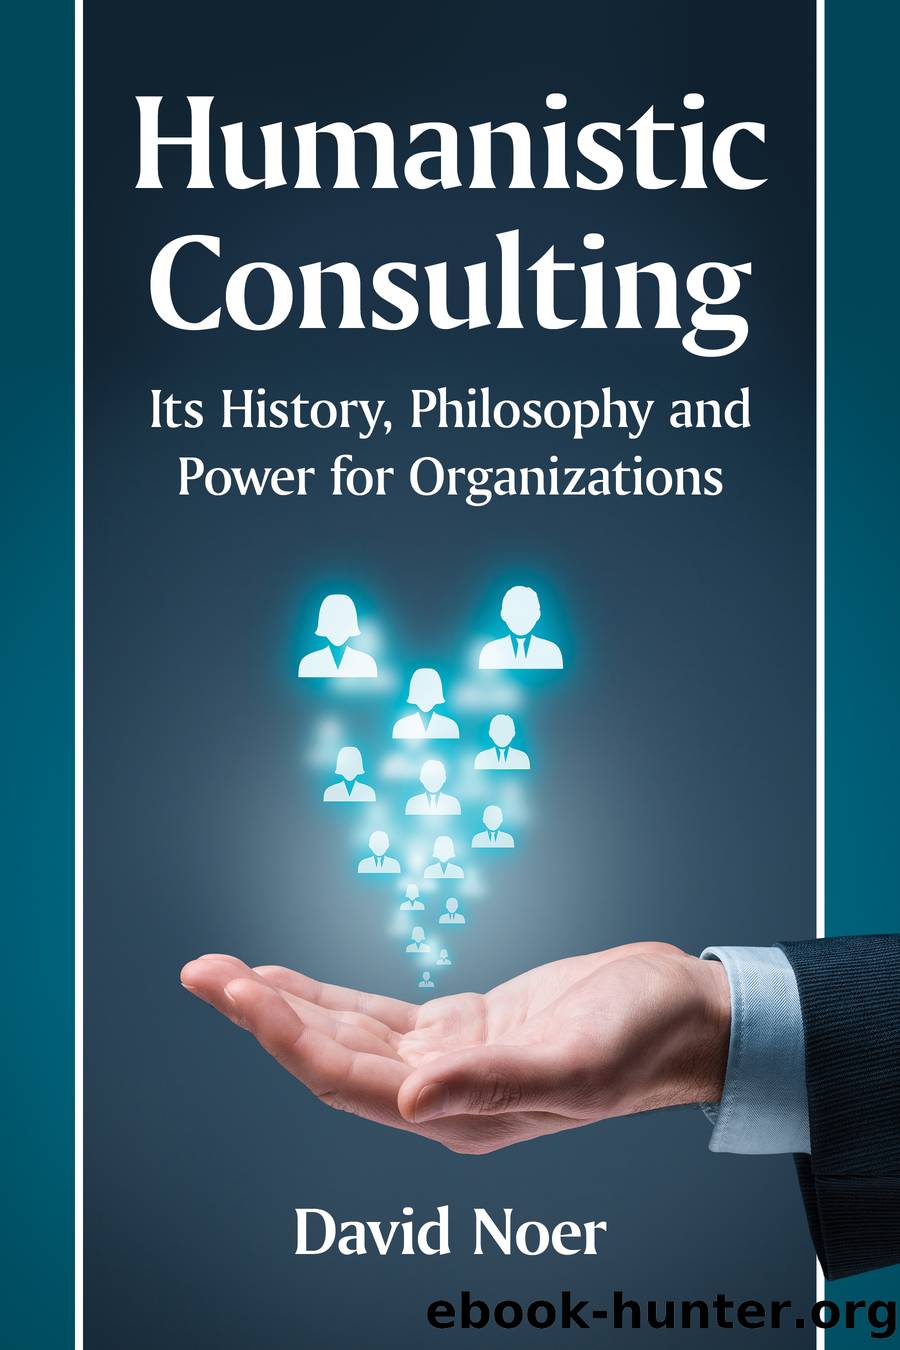 Humanistic Consulting by David Noer